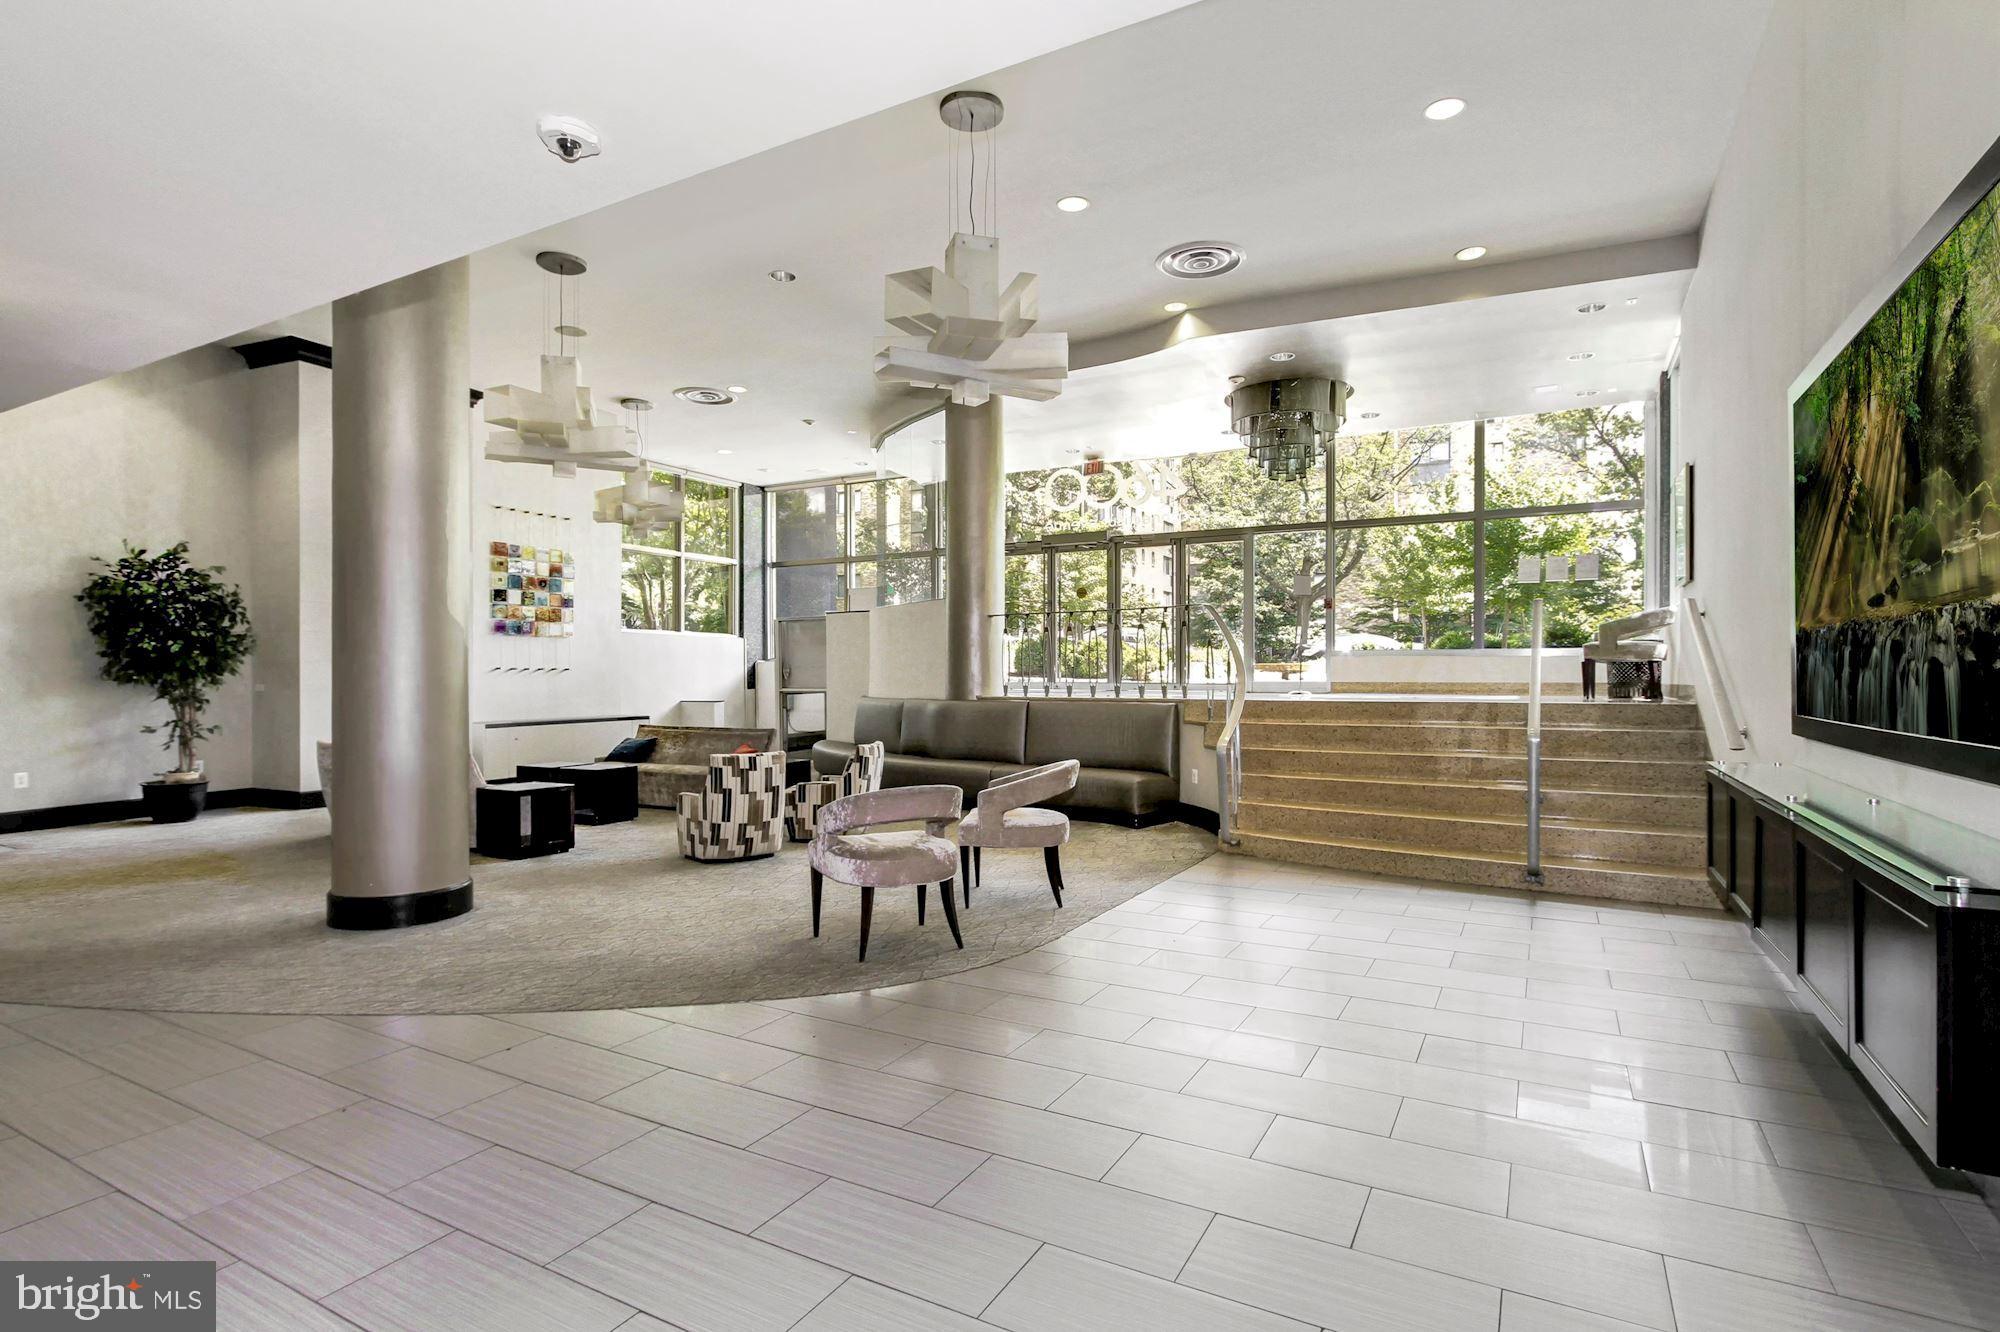 a lobby with furniture and large windows